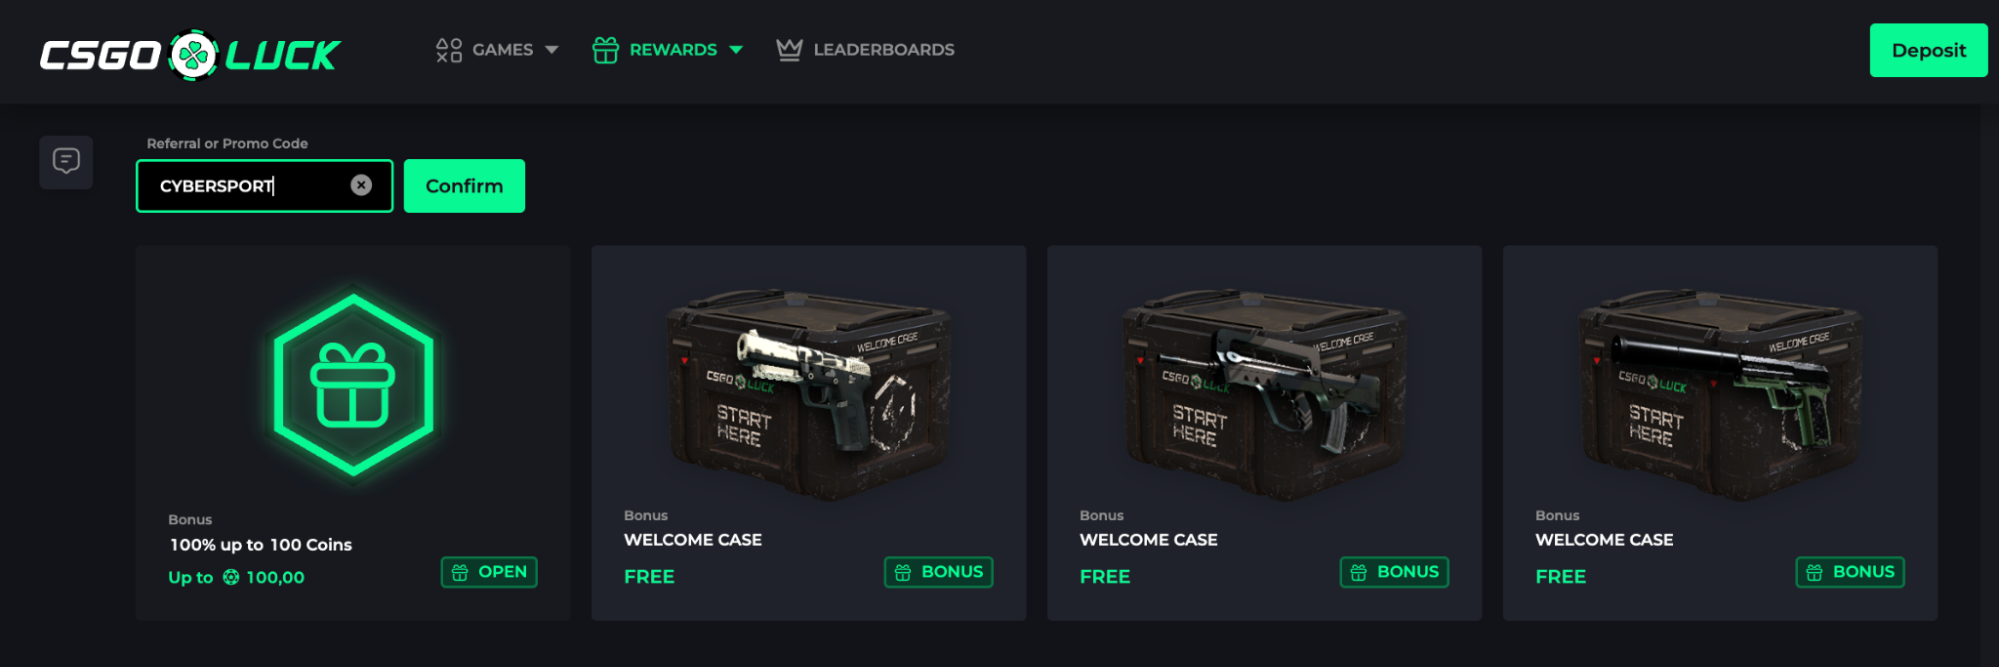 CSGOLuck Promo Code “CYBERSPORT” for 3 FREE Cases